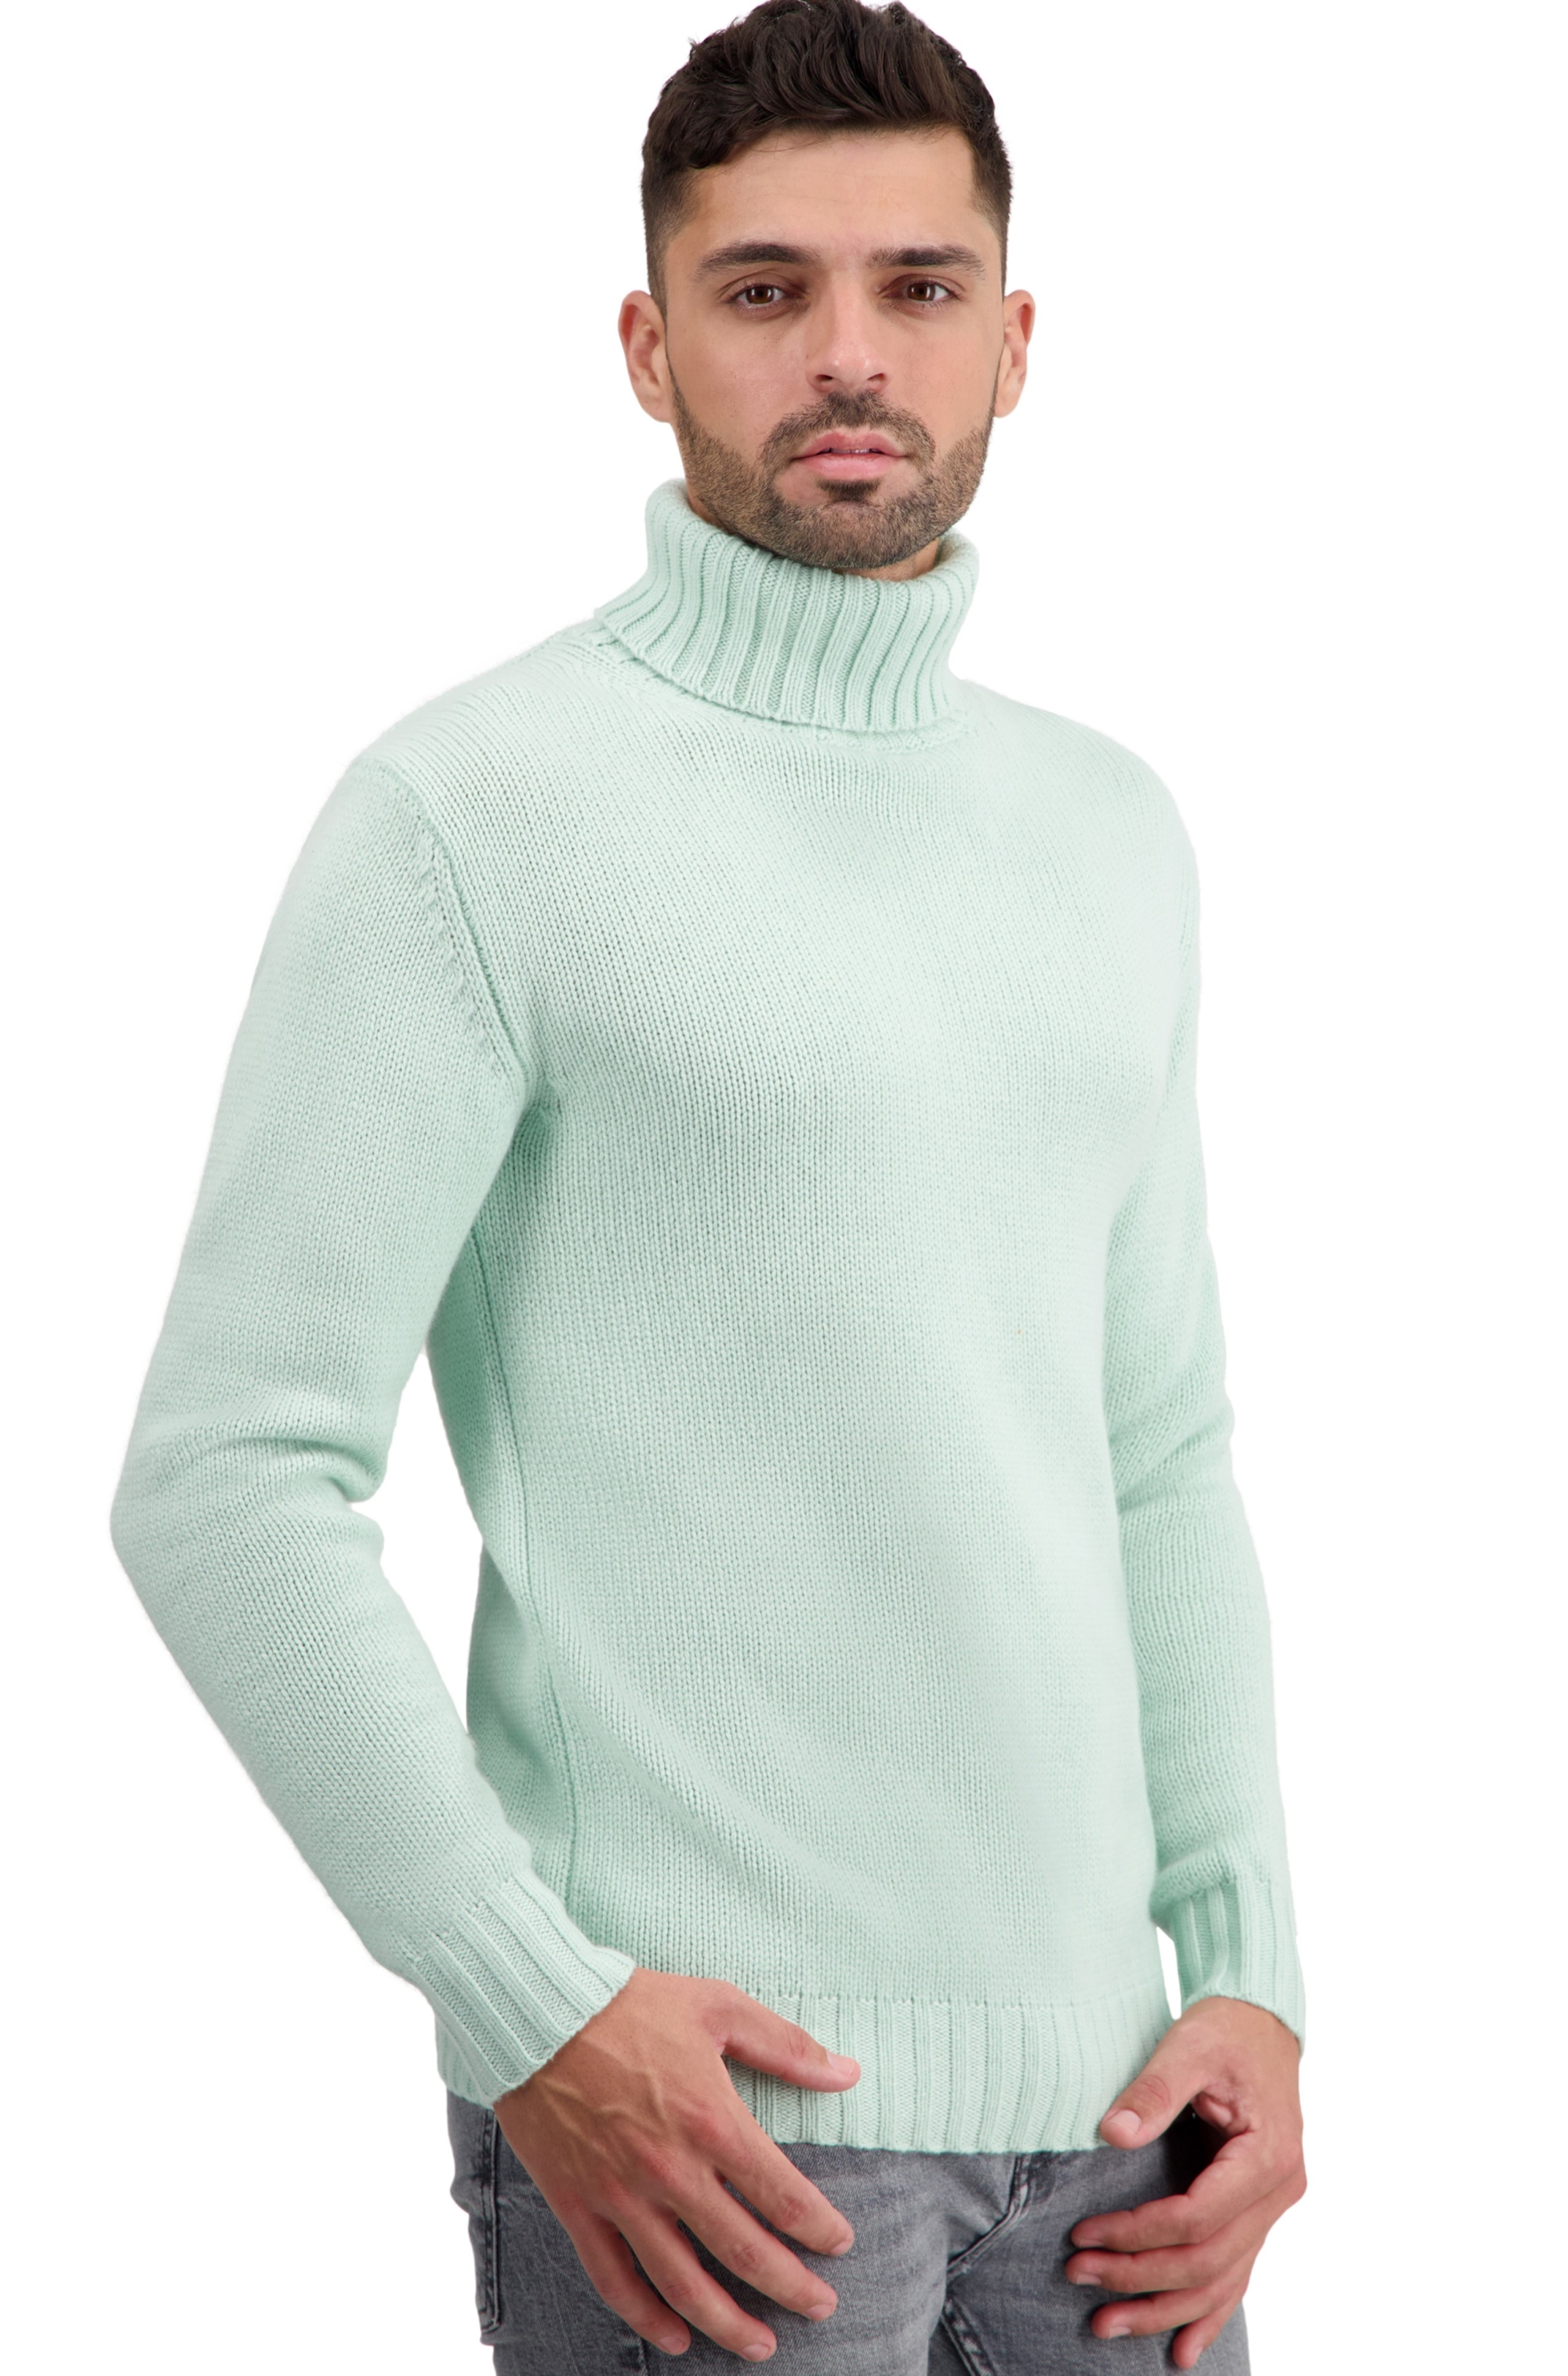 Cashmere men basic sweaters at low prices tobago first embrace 3xl